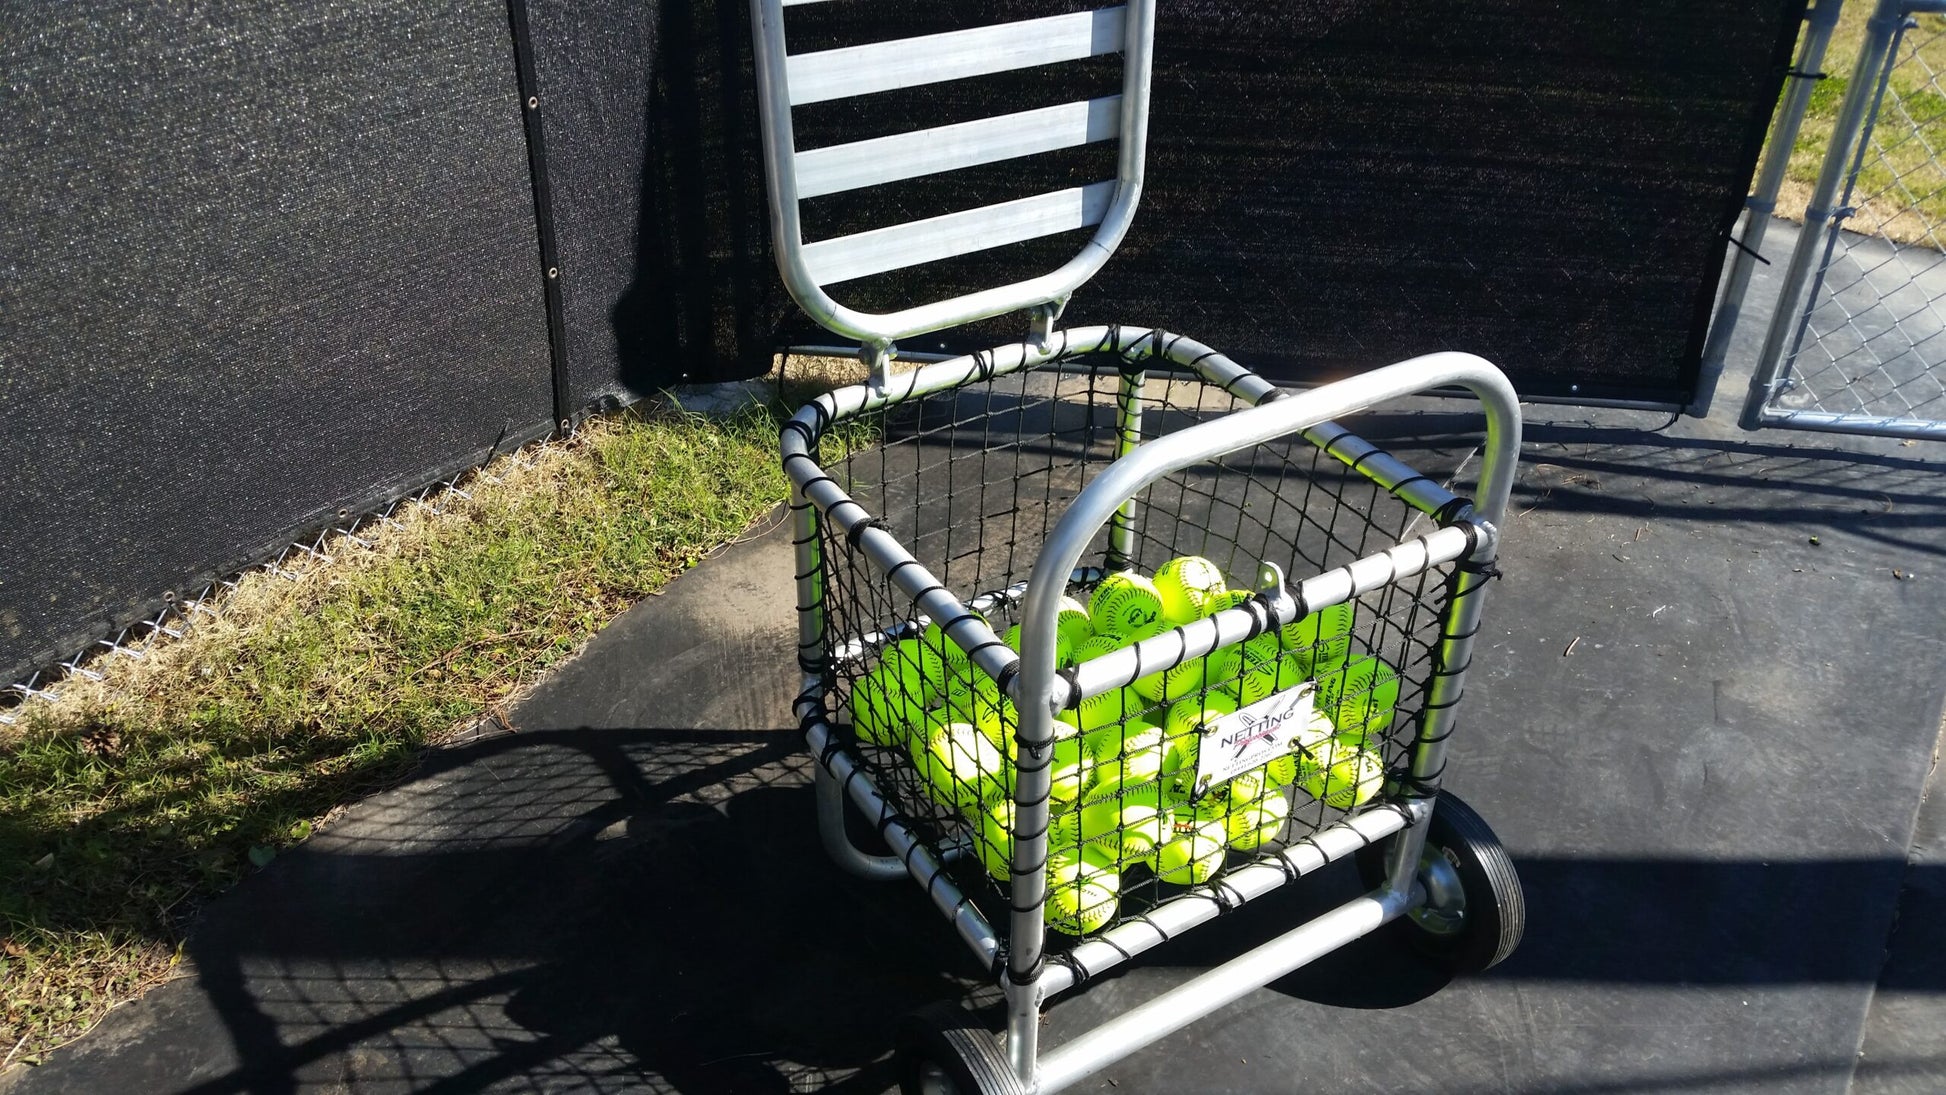 A cart full of tennis balls on the ground.